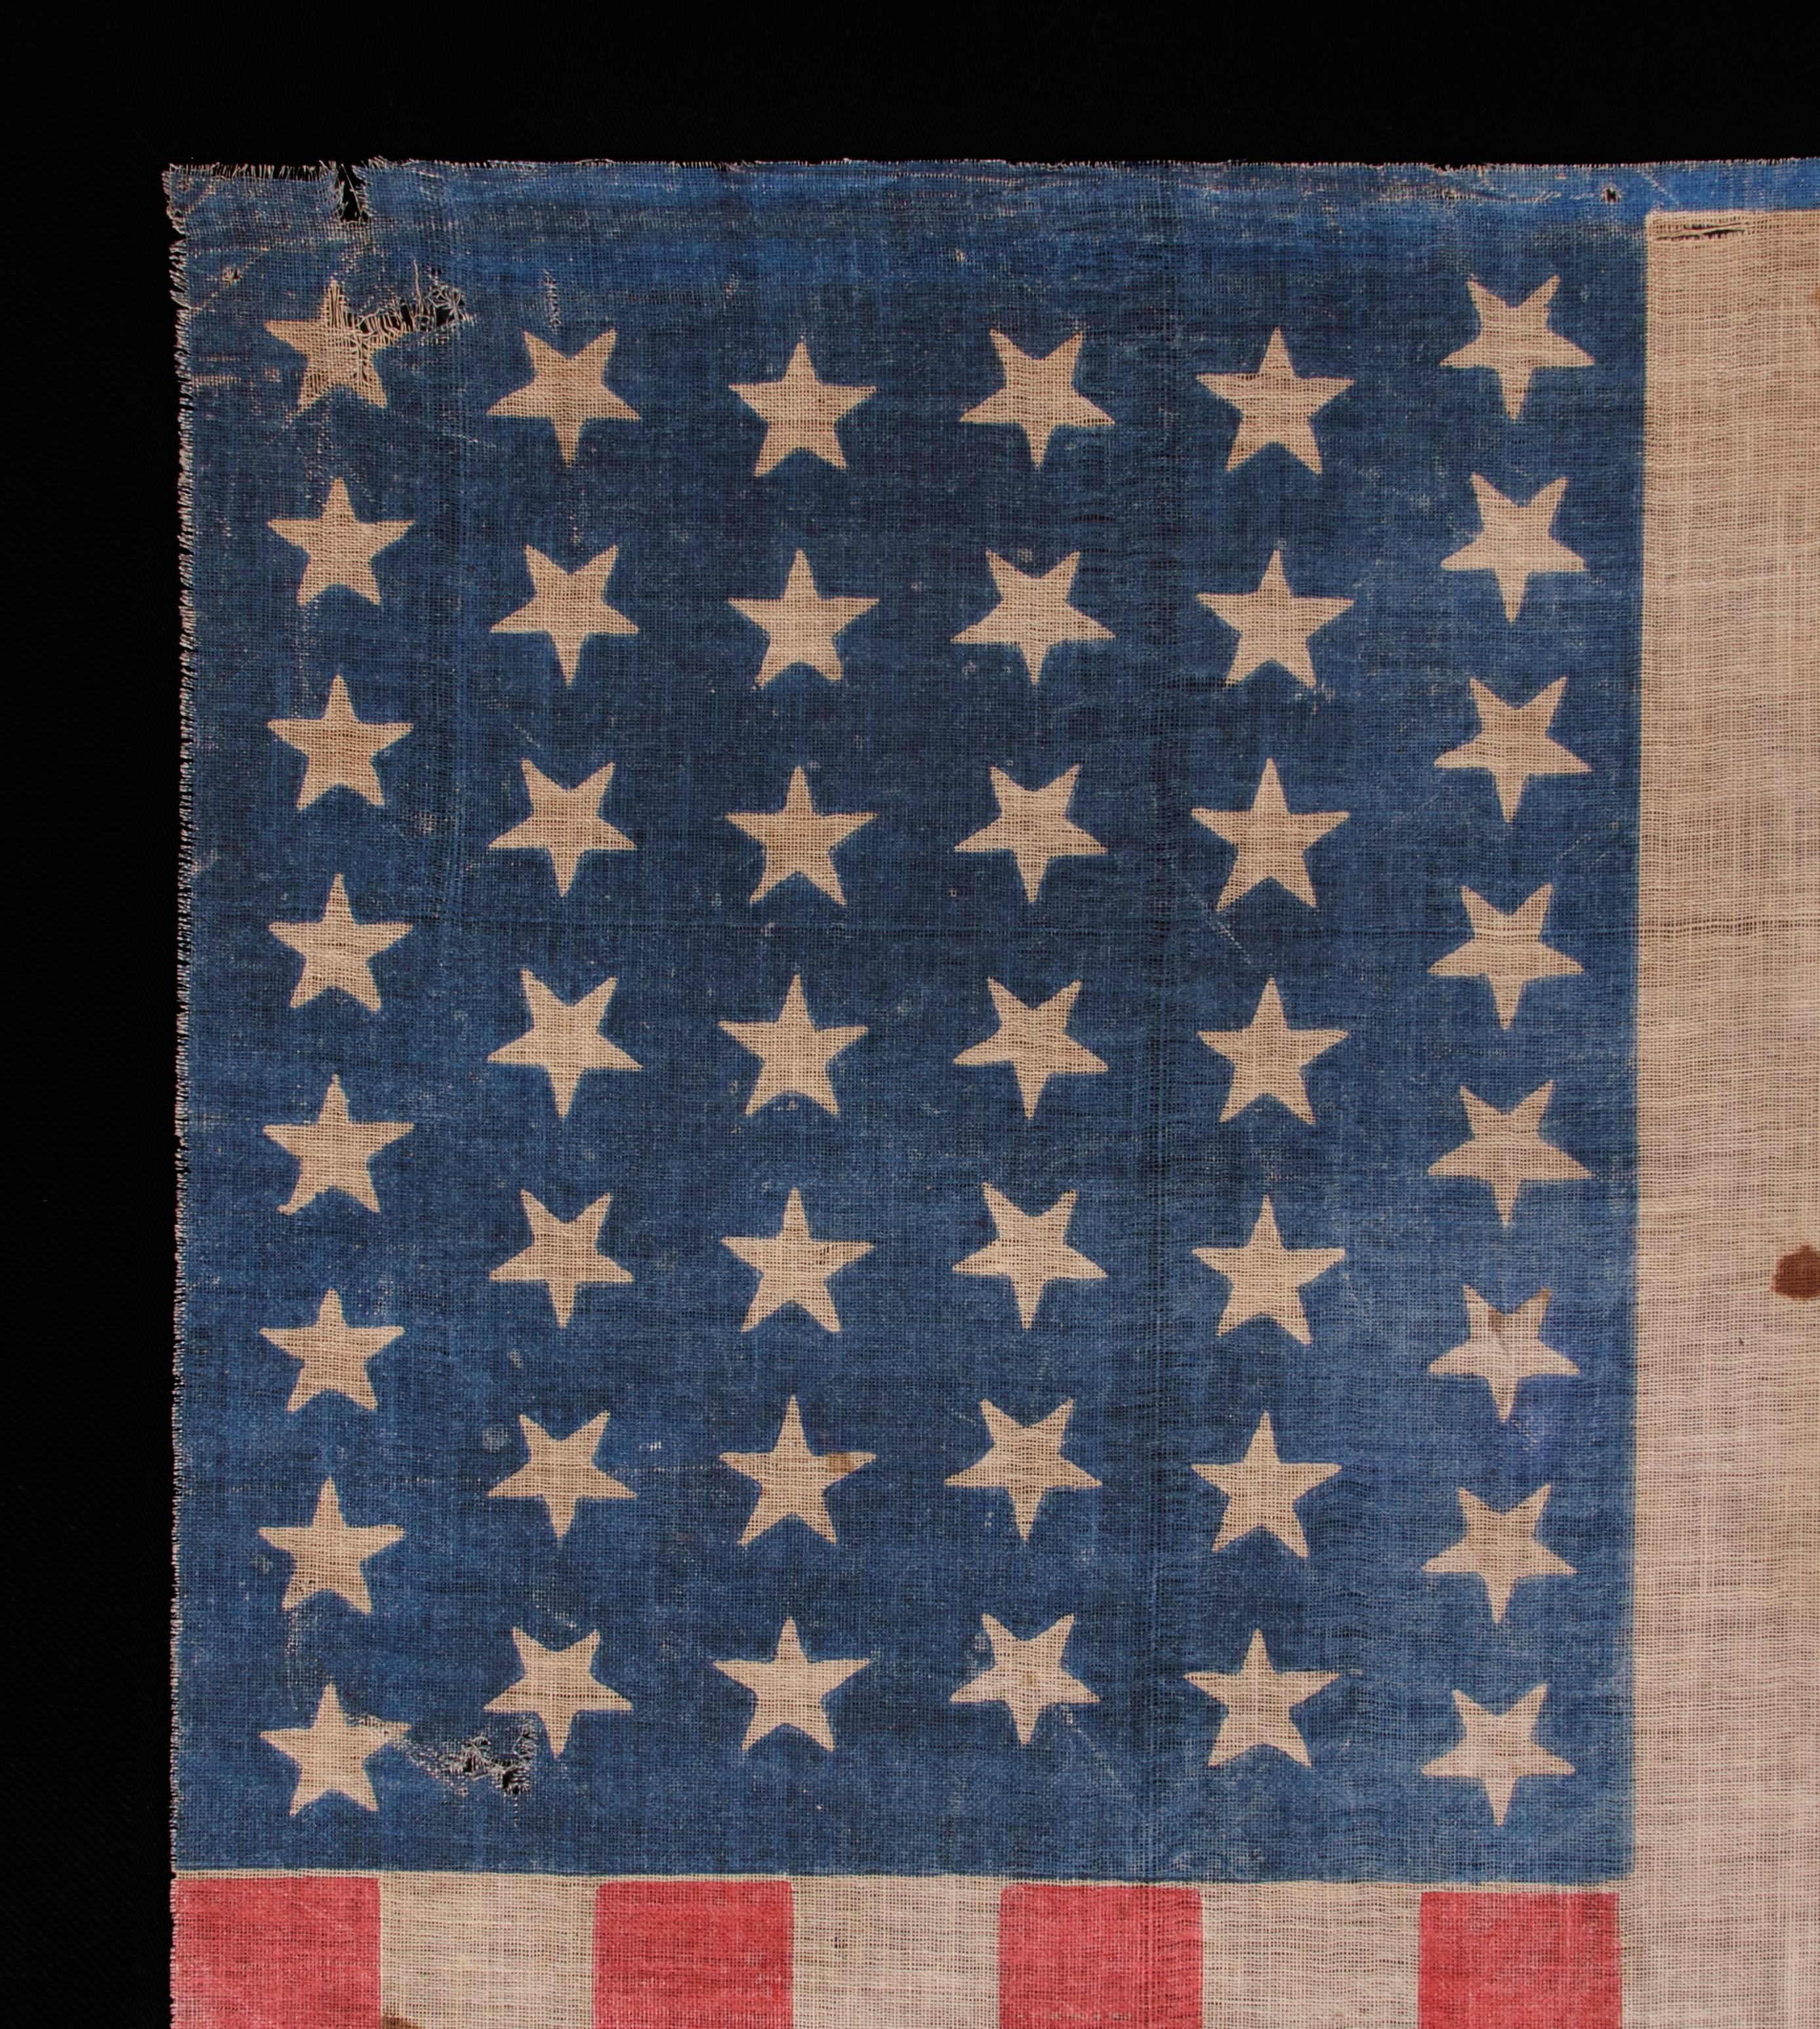 44 Stars in Dancing Rows in an Hourglass Formation, on an Antique American Flag In Good Condition In York County, PA